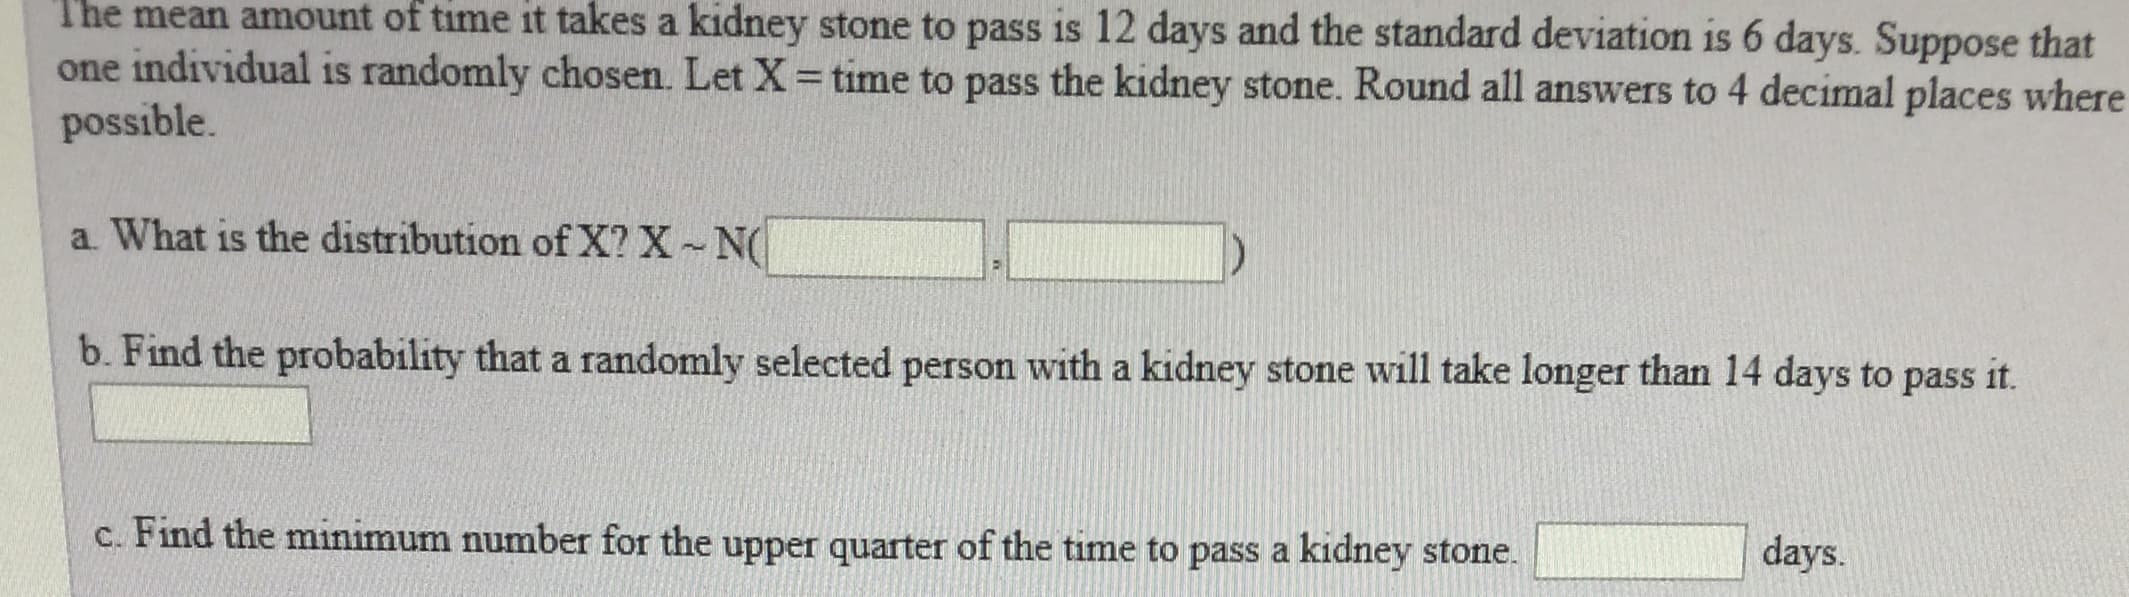 The
time it takes a kidney stone to pass is 12 days and the standard deviation is 6 days. Suppose that
mean amount
of
one individual is randomly chosen. Let X = time to pass the kidney stone. Round all answers to 4 decimal places where
possible.
a. What is the distribution of X? X-N
b. Find the probability that a randomly selected person with a kidney stone will take longer than 14 days to pass it.
d !
c. Find the minimum number for the upper quarter of the time to pass a kidney stone.
days.
